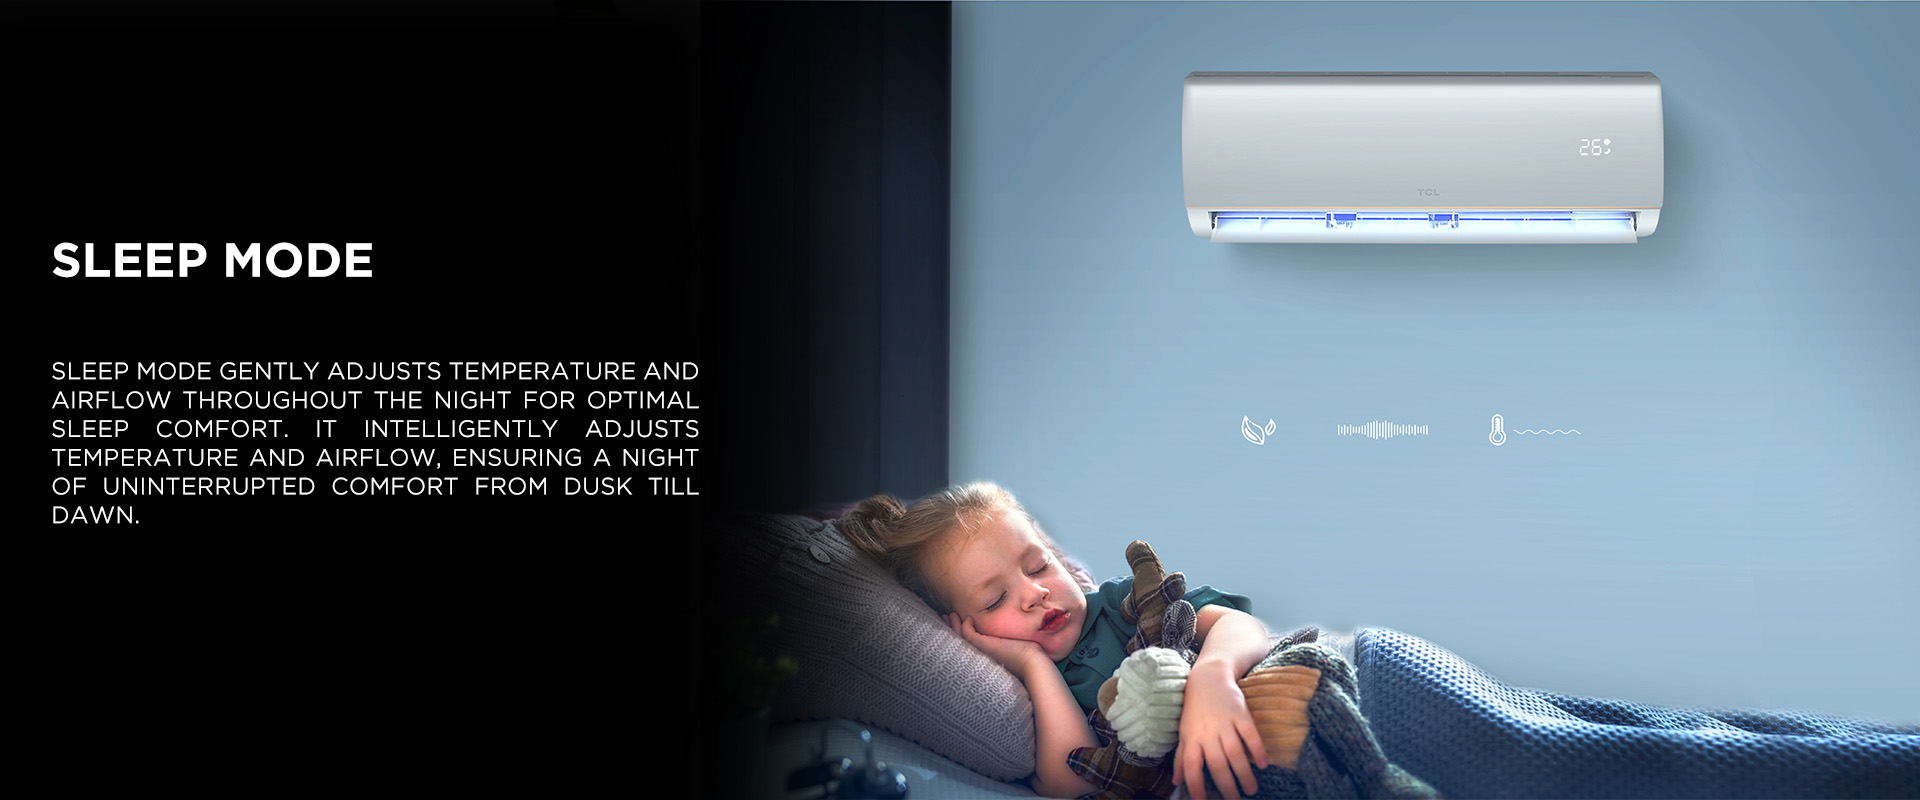 Sleep mode gently adjusts temperature and airflow throughout the night for optimal sleep comfort. It intelligently adjusts temperature and airflow, ensuring a night of uninterrupted comfort from dusk till dawn.